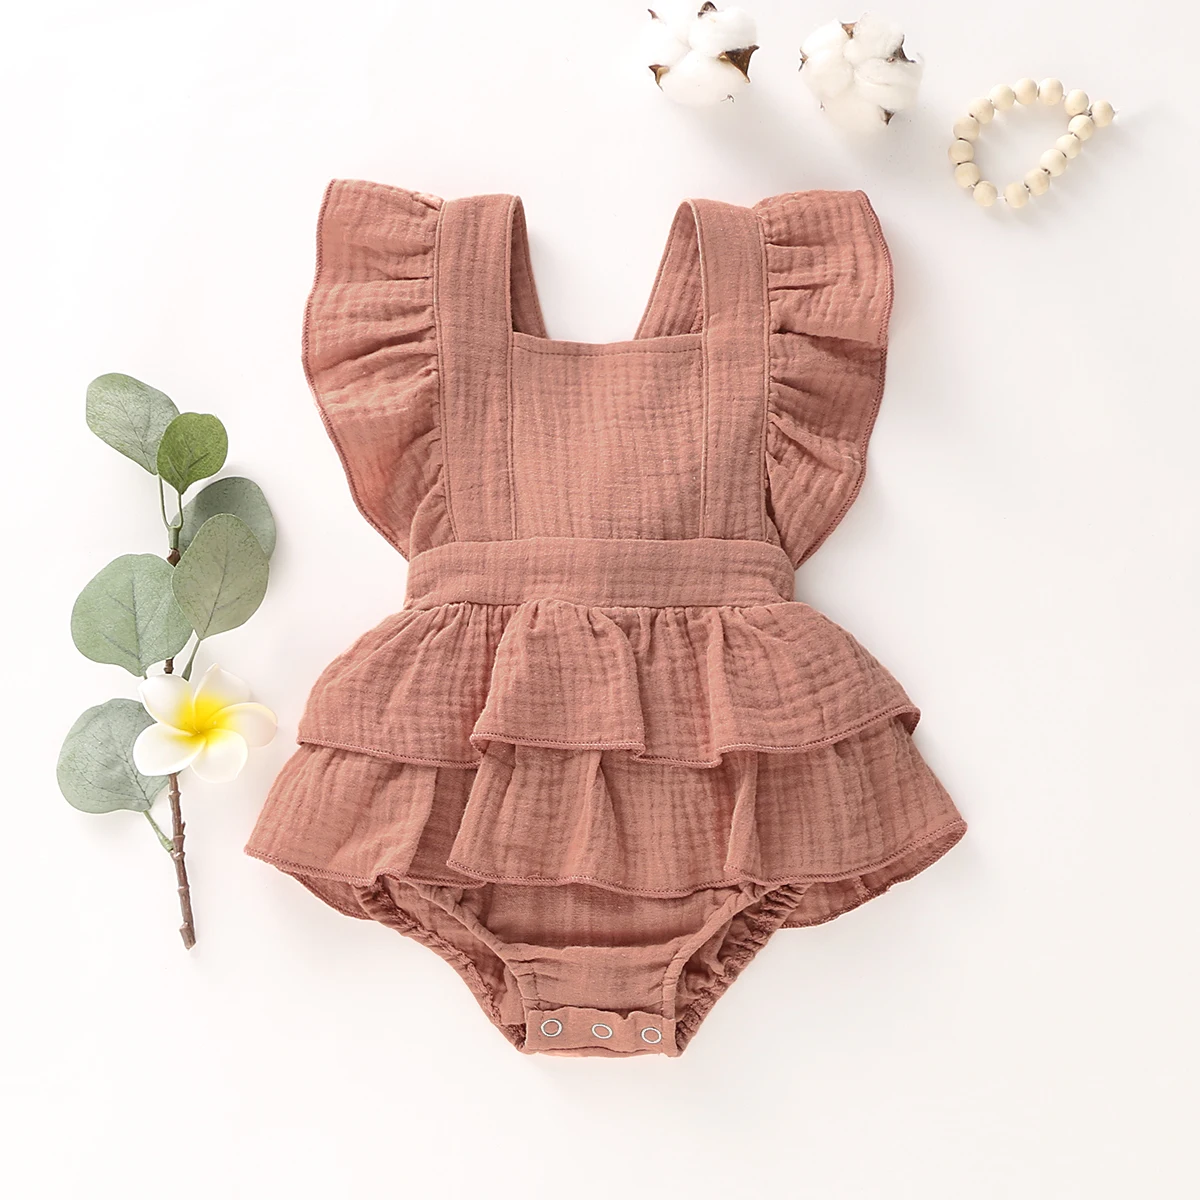 

Summer Newborn Baby Girl Clothes Solid Color Sleeveless Ruffle Strap Romper Jumpsuit Toddler Cotton Outfit Sunsuit Clothes